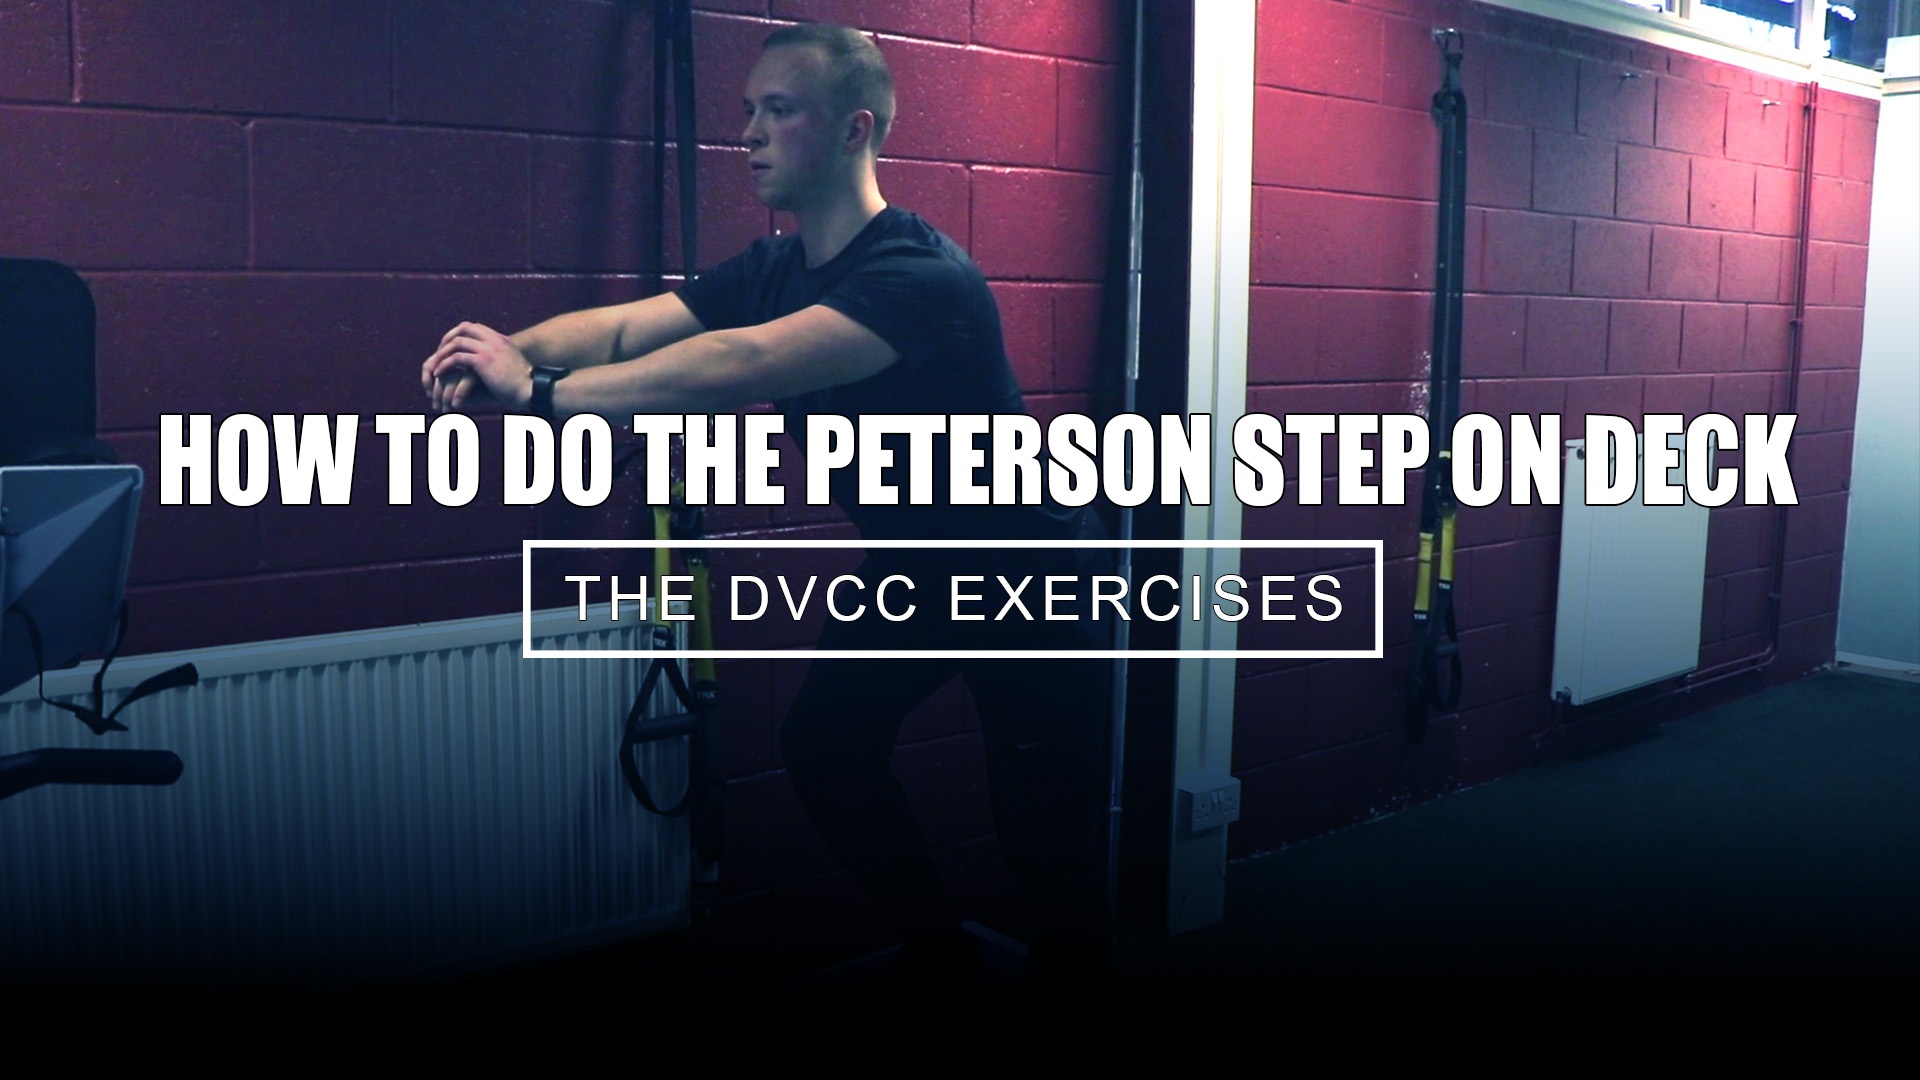 How to do the peterson step on deck